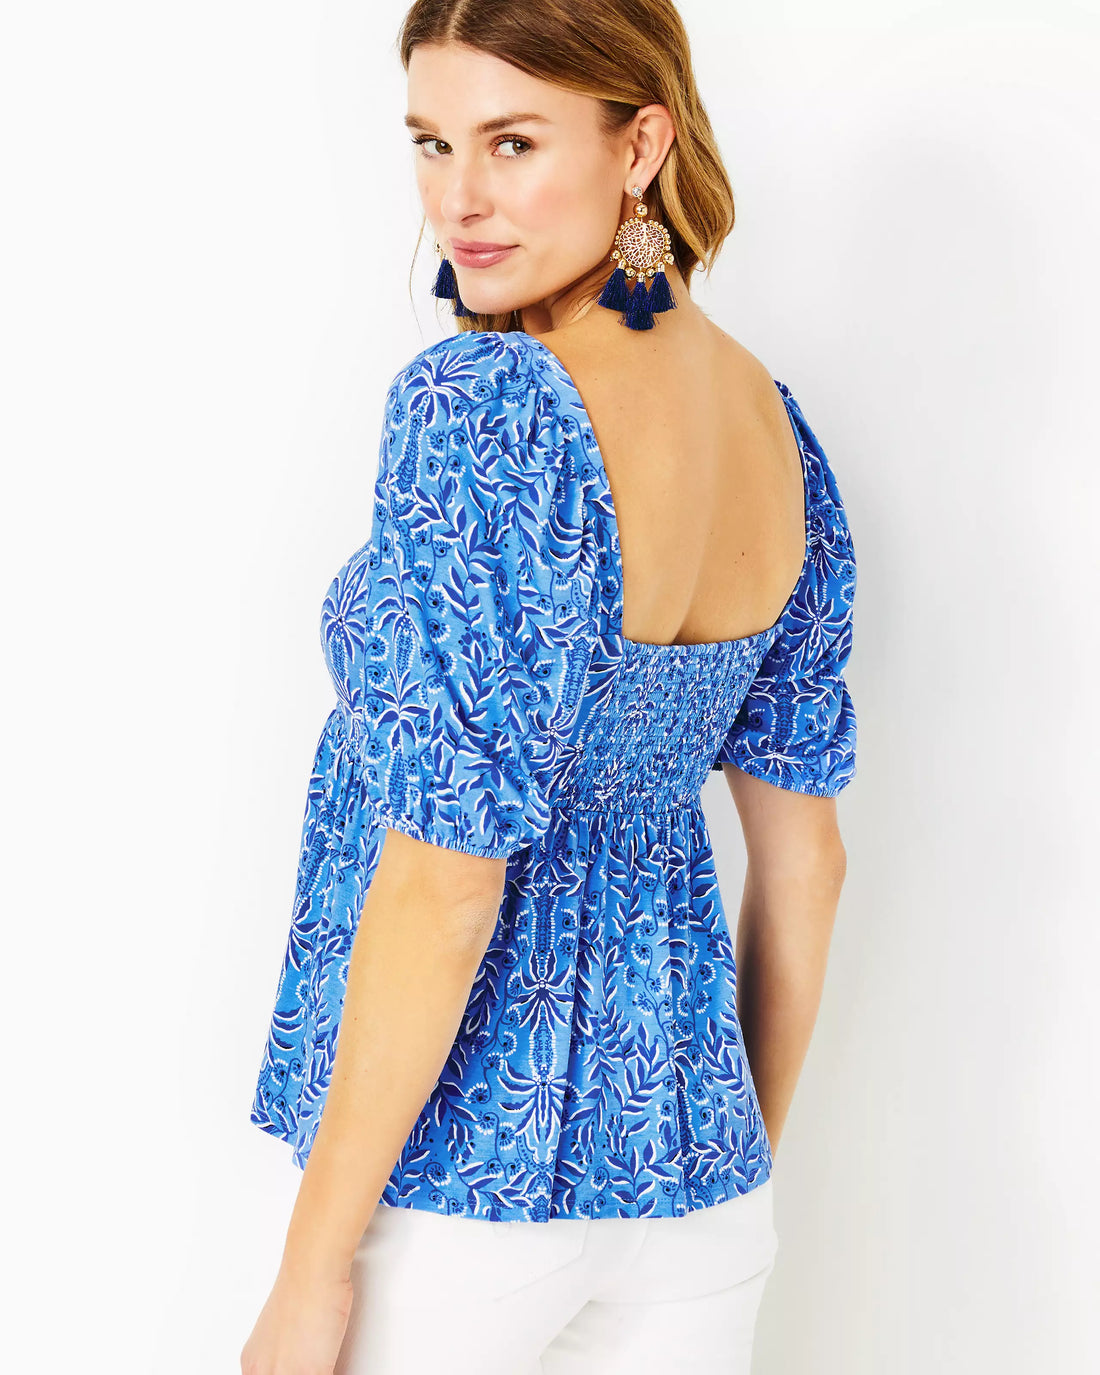 Lilly Pulitzer | Floriana Knit Top